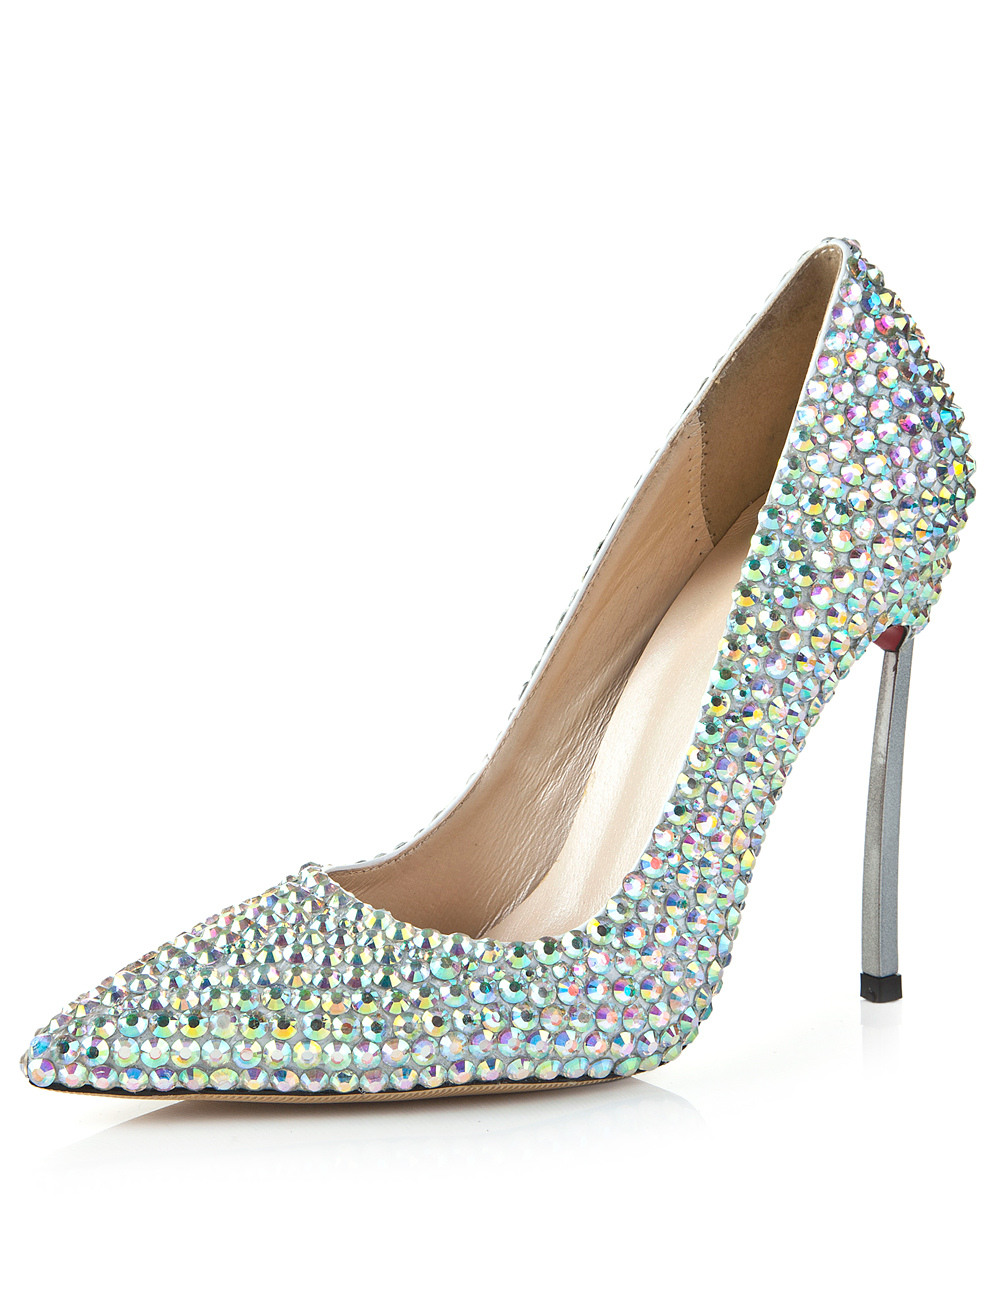 Pointy Toe Shoes with Rhinestones Detailing - Milanoo.com